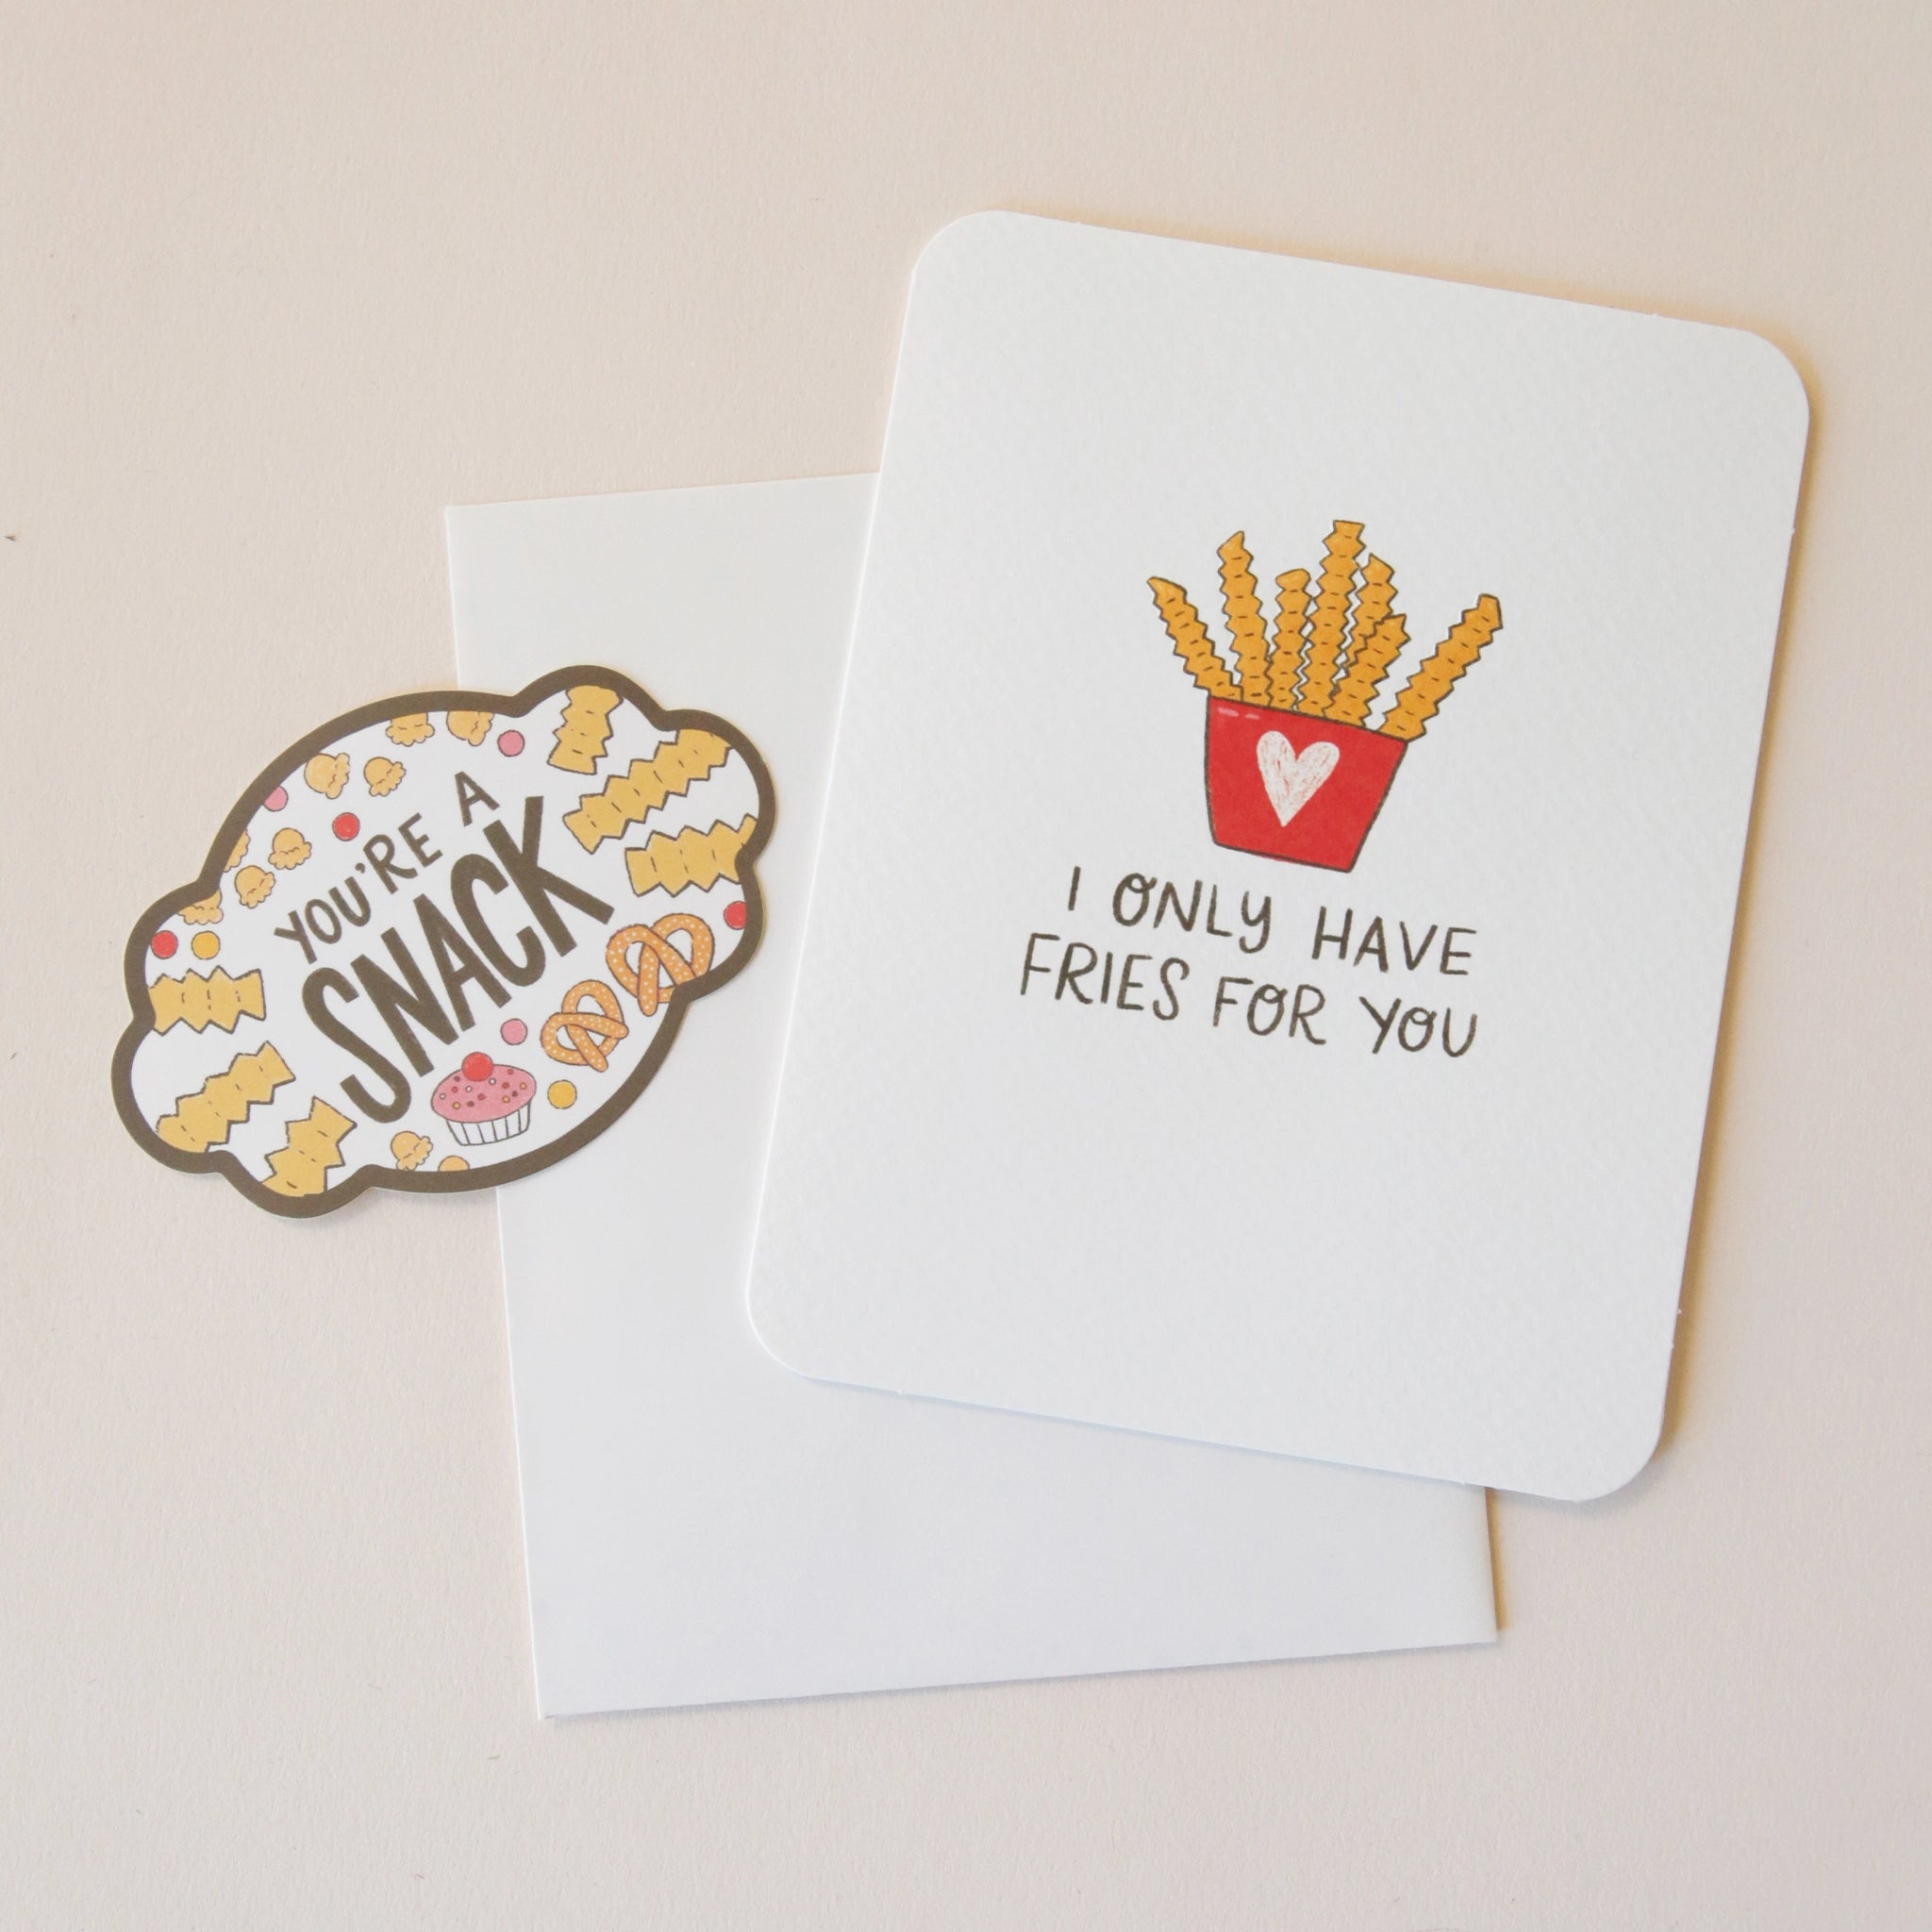 A white card with an illustration of a red carton with a pink heart on the front holding crinkle cut French fries and black text that reads, "I Only Have Fries For You" as well as a coordinating sticker that says, "You're A Snack" along with a border of fries, popcorn, pretzels and cupcakes.